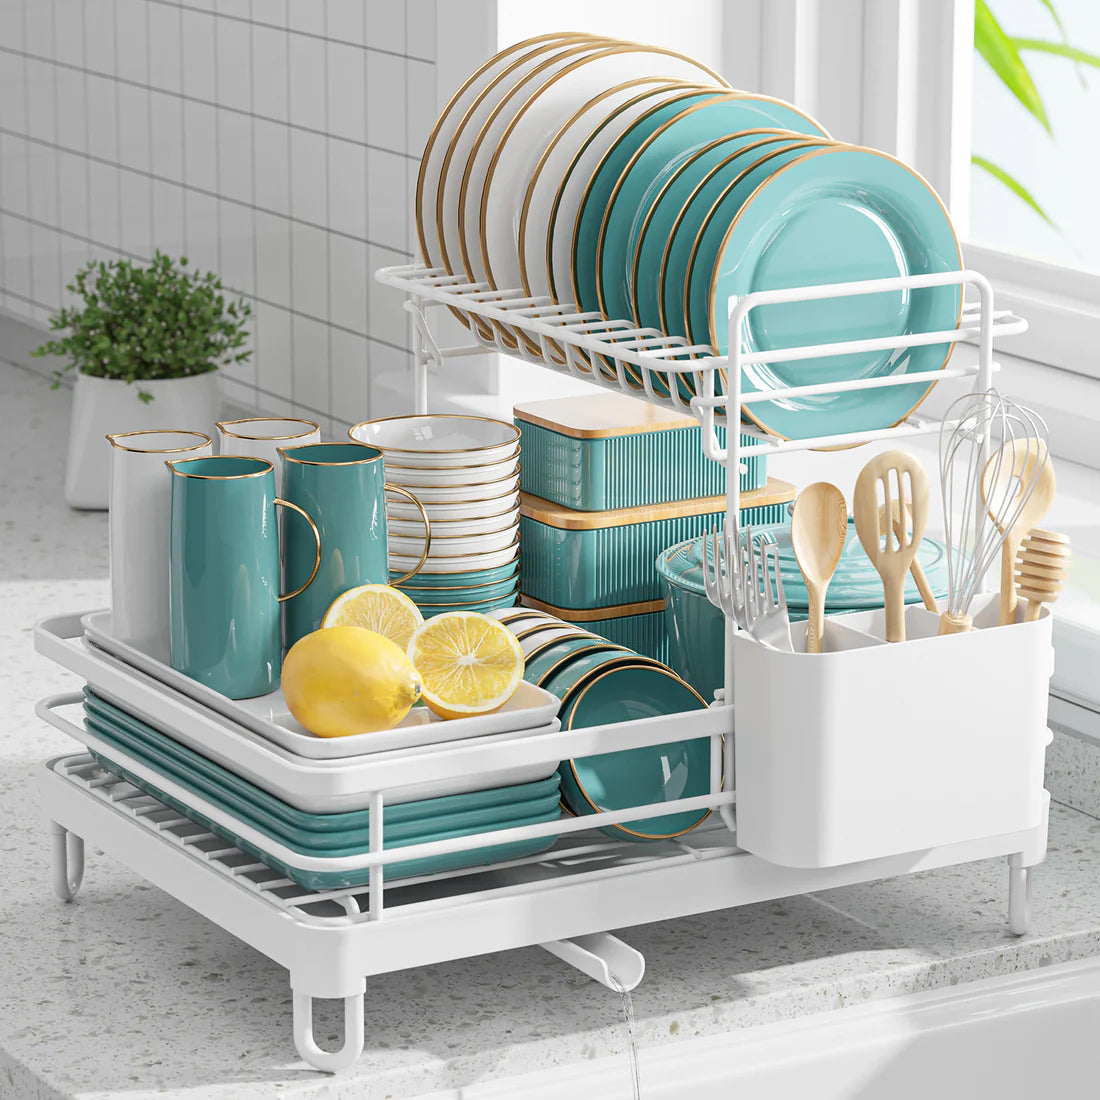 Sakugi Dish Drying Rack - X-Large Stainless Steel Dish Rack for Kitchen Counter, Kitchen Organizers and Storage for Dishes, Bowls, Cutlery, White